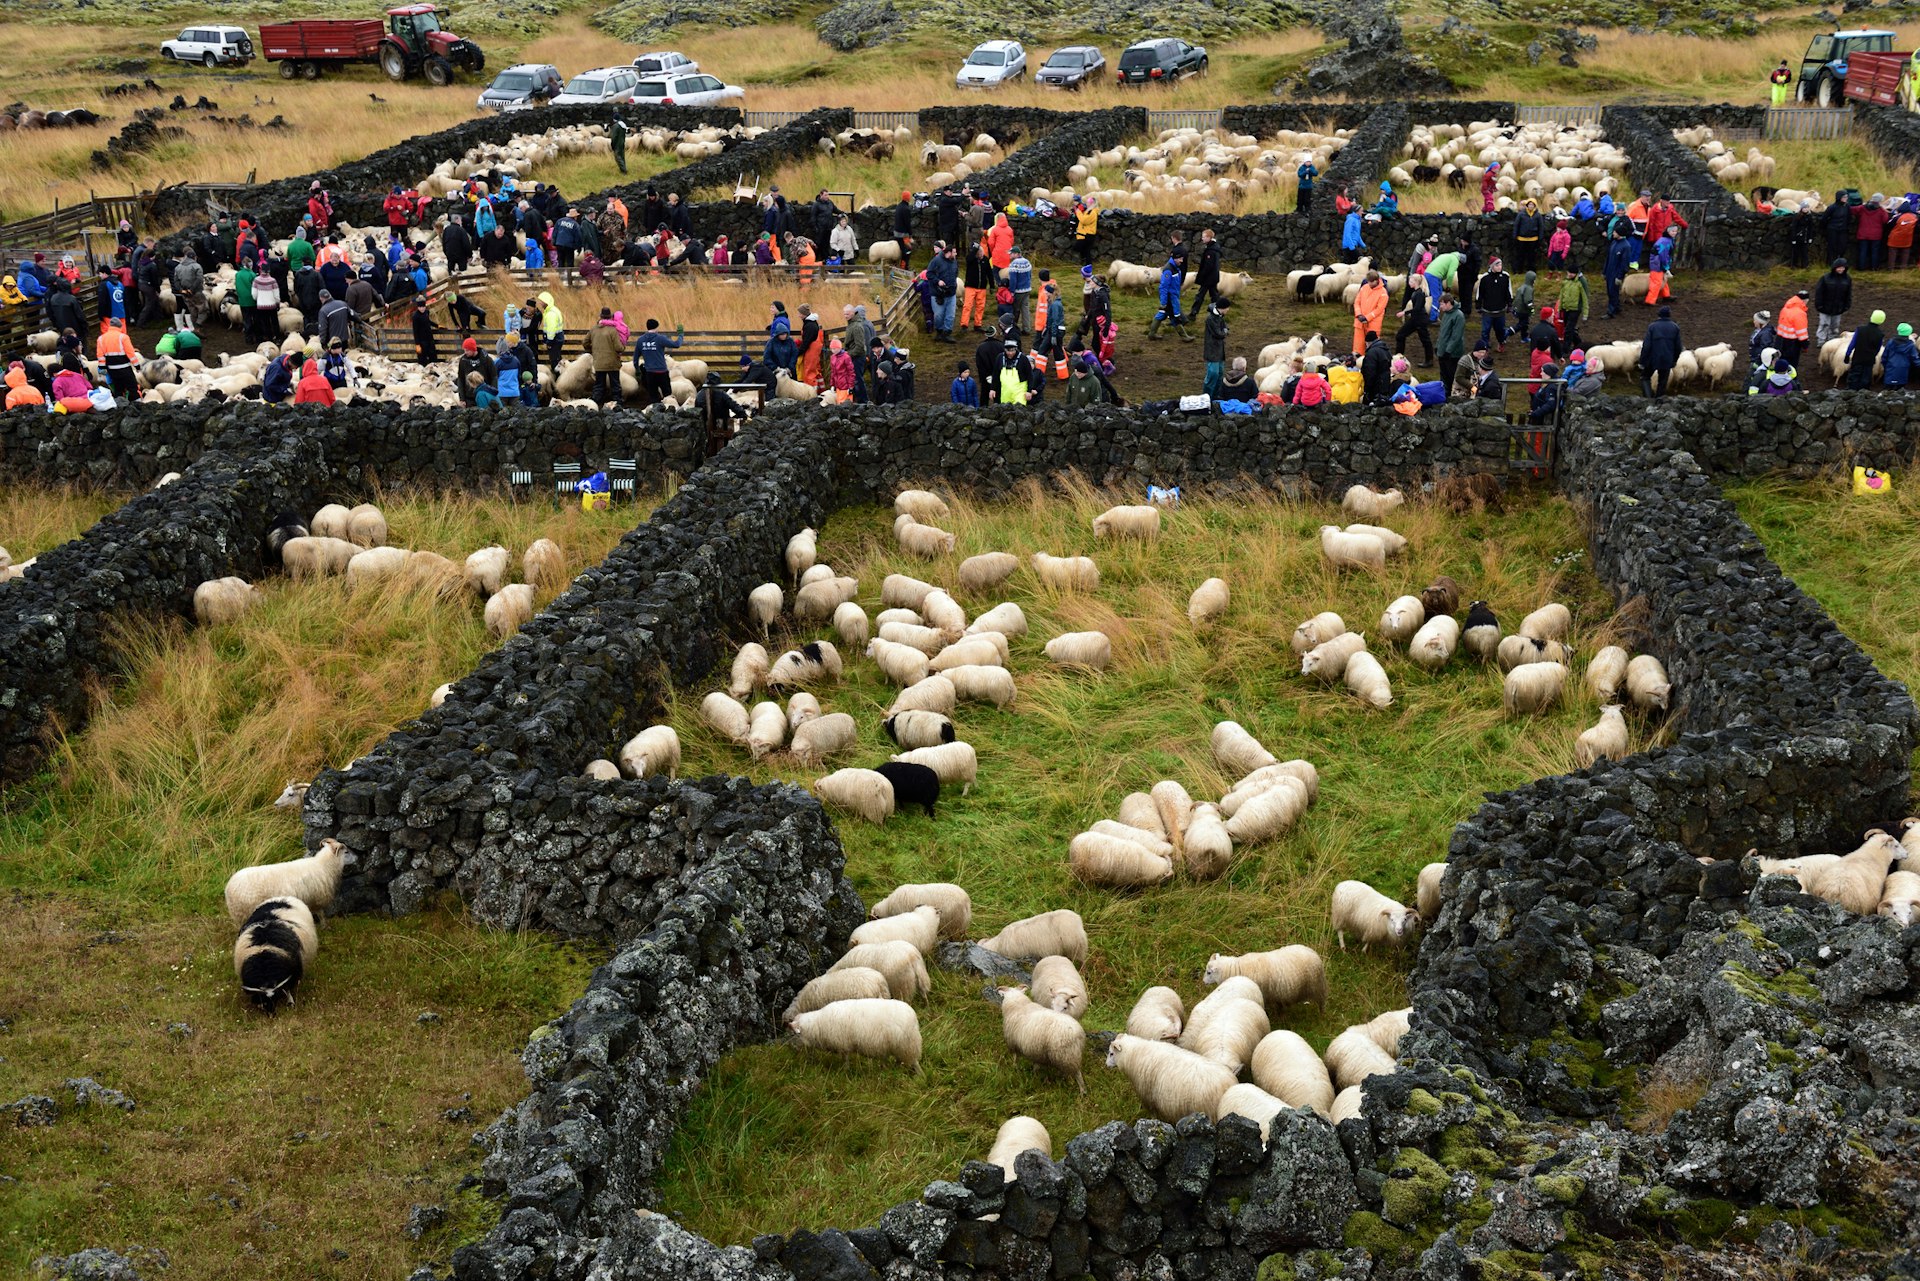 Icelanders head off to the countryside to take part in rettir – the annual sheep round up